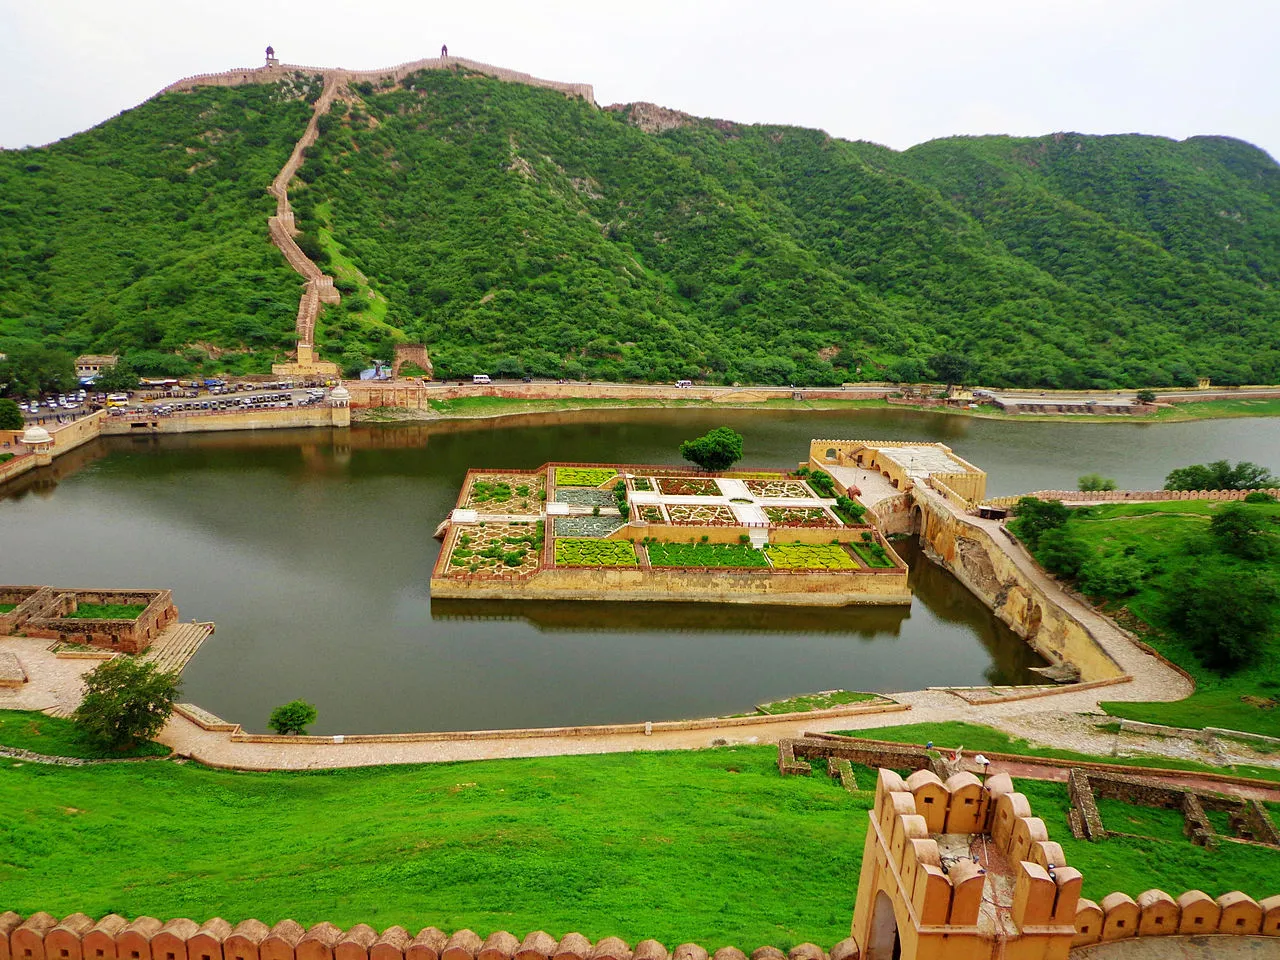 Maota Lake at the base of Amer Fort supplies water to the fort even today